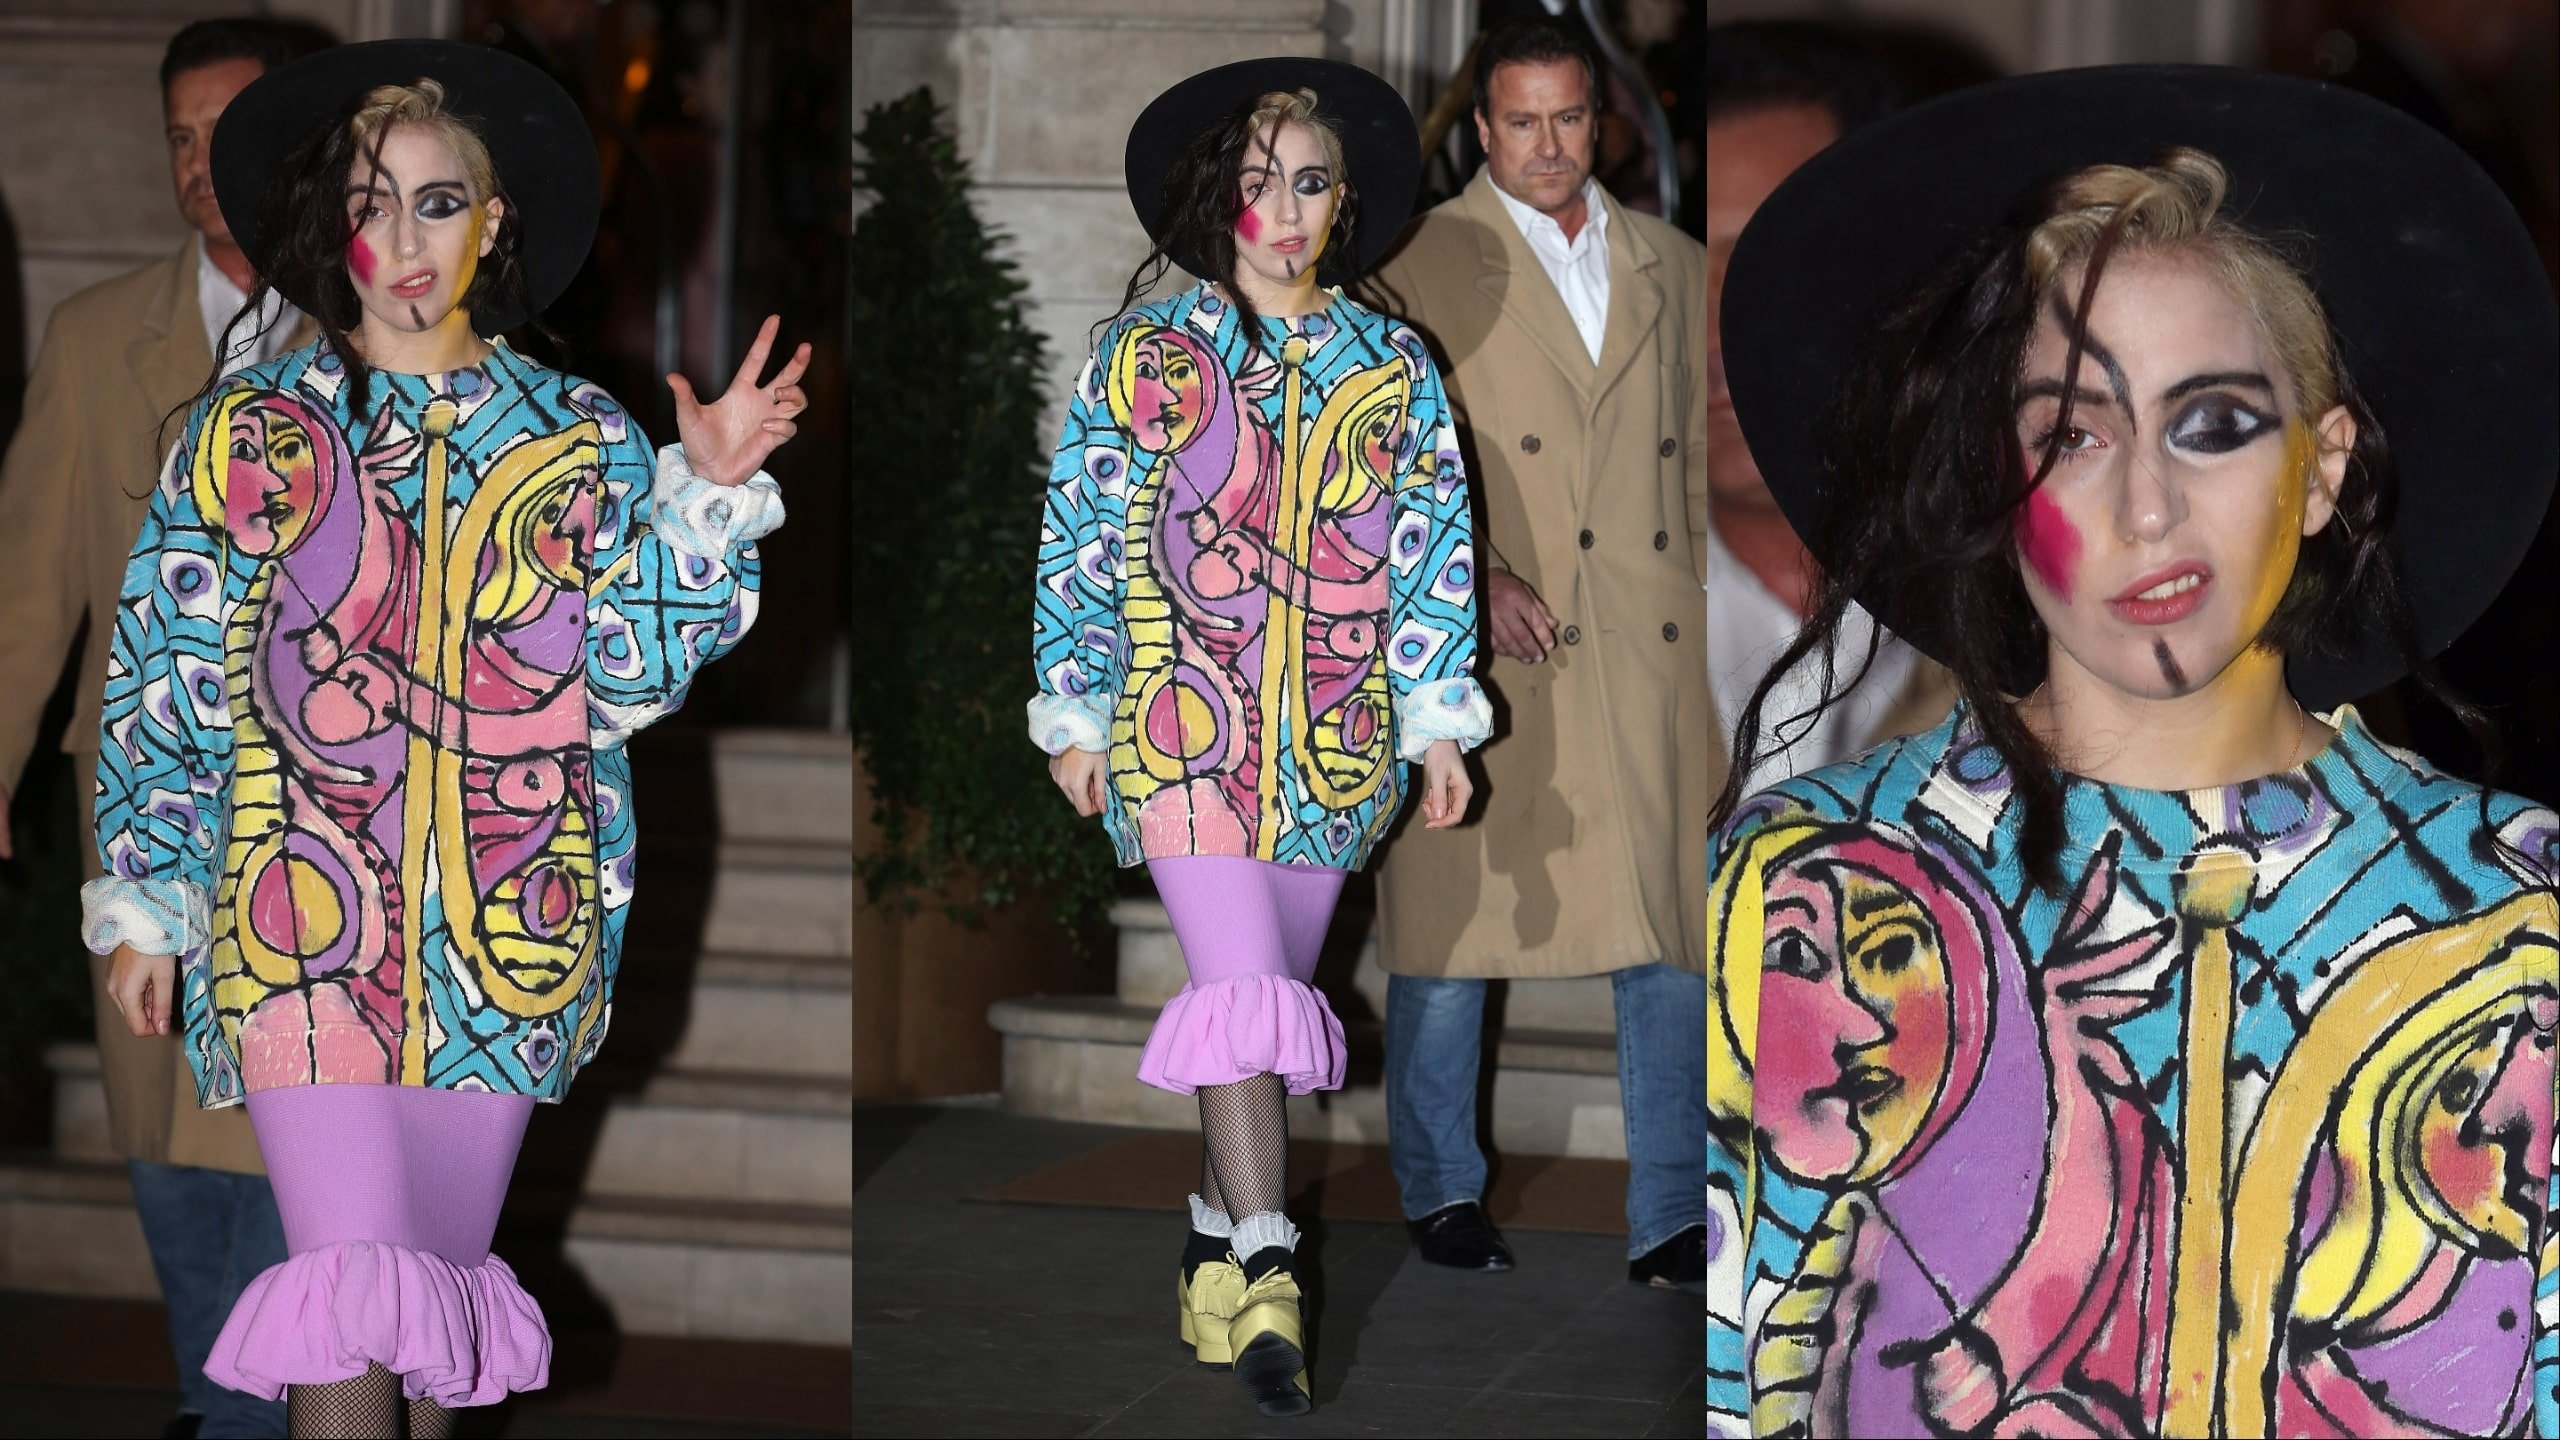 Singer Lady Gaga seen leaving her hotel wear a Picasso-inspired jacket